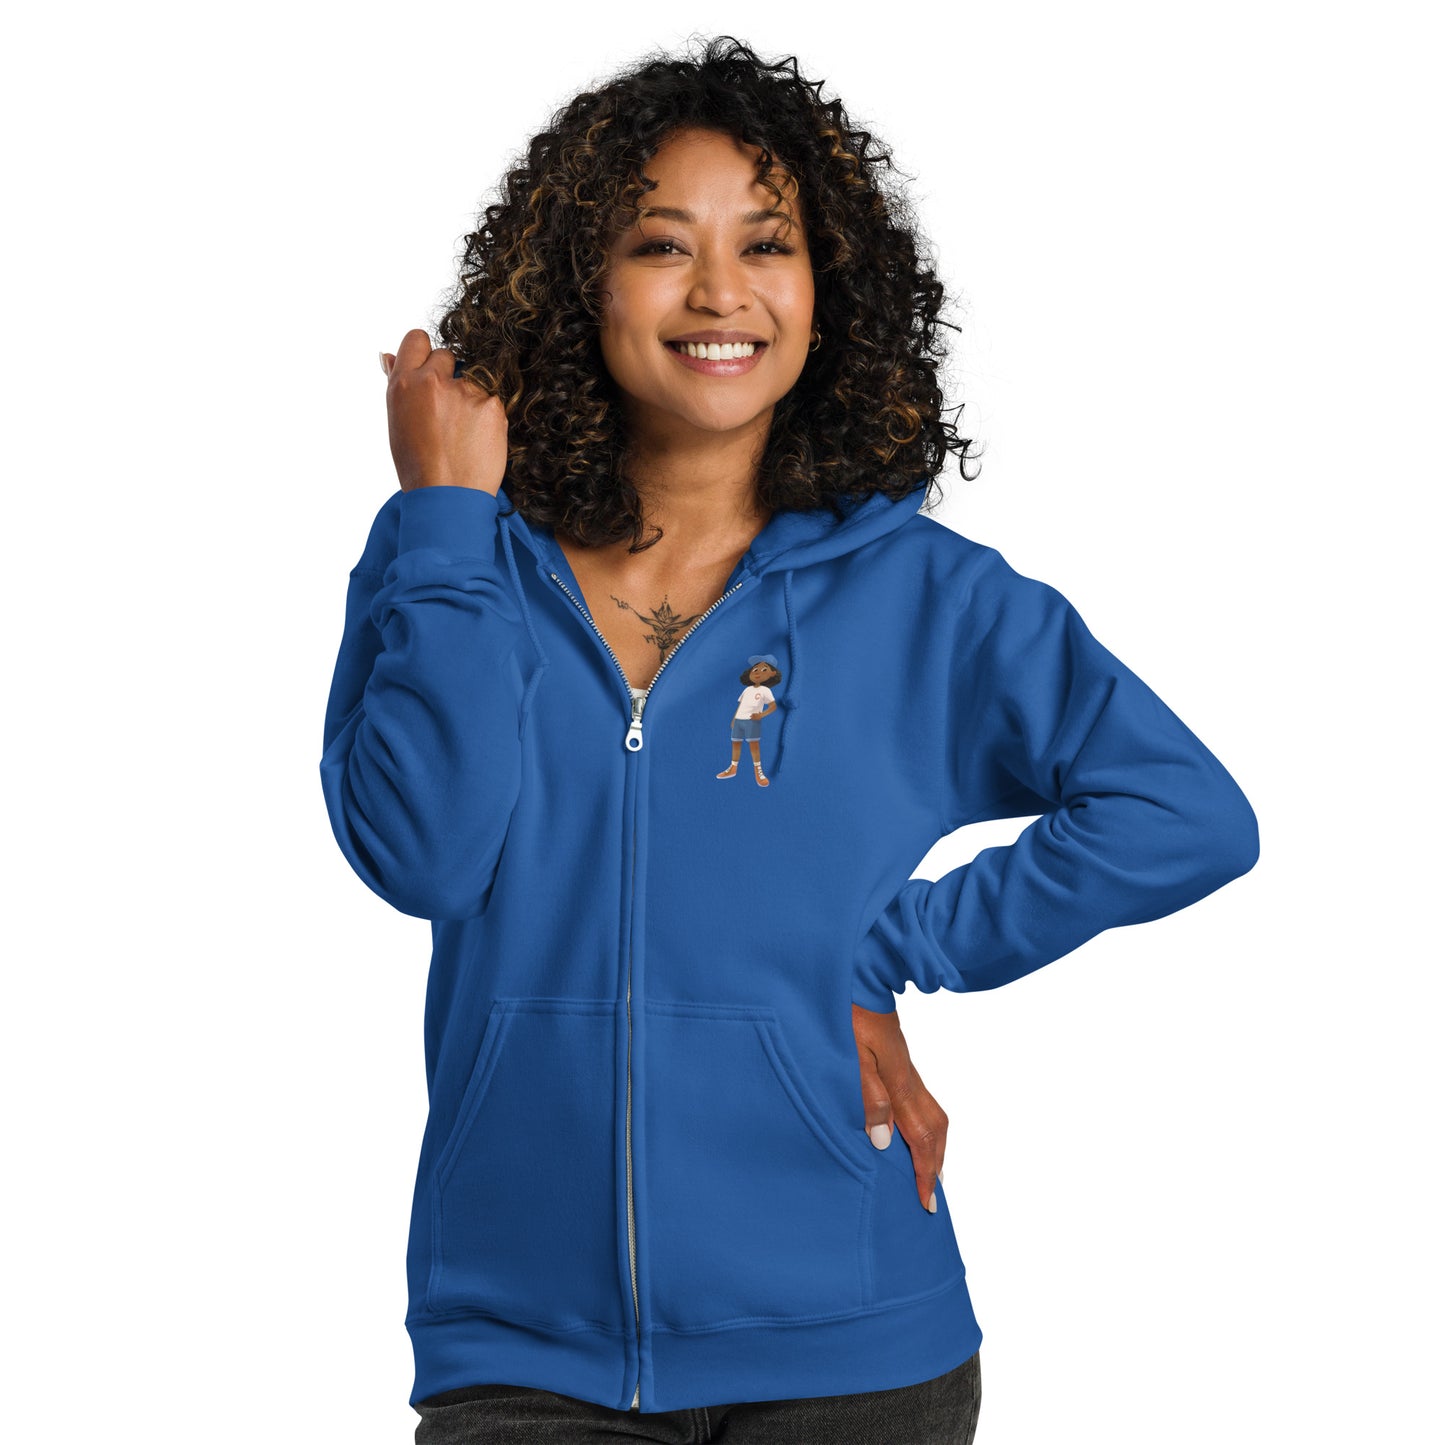 A Day at Shea Adult Unisex Zip Graphic Hoodie